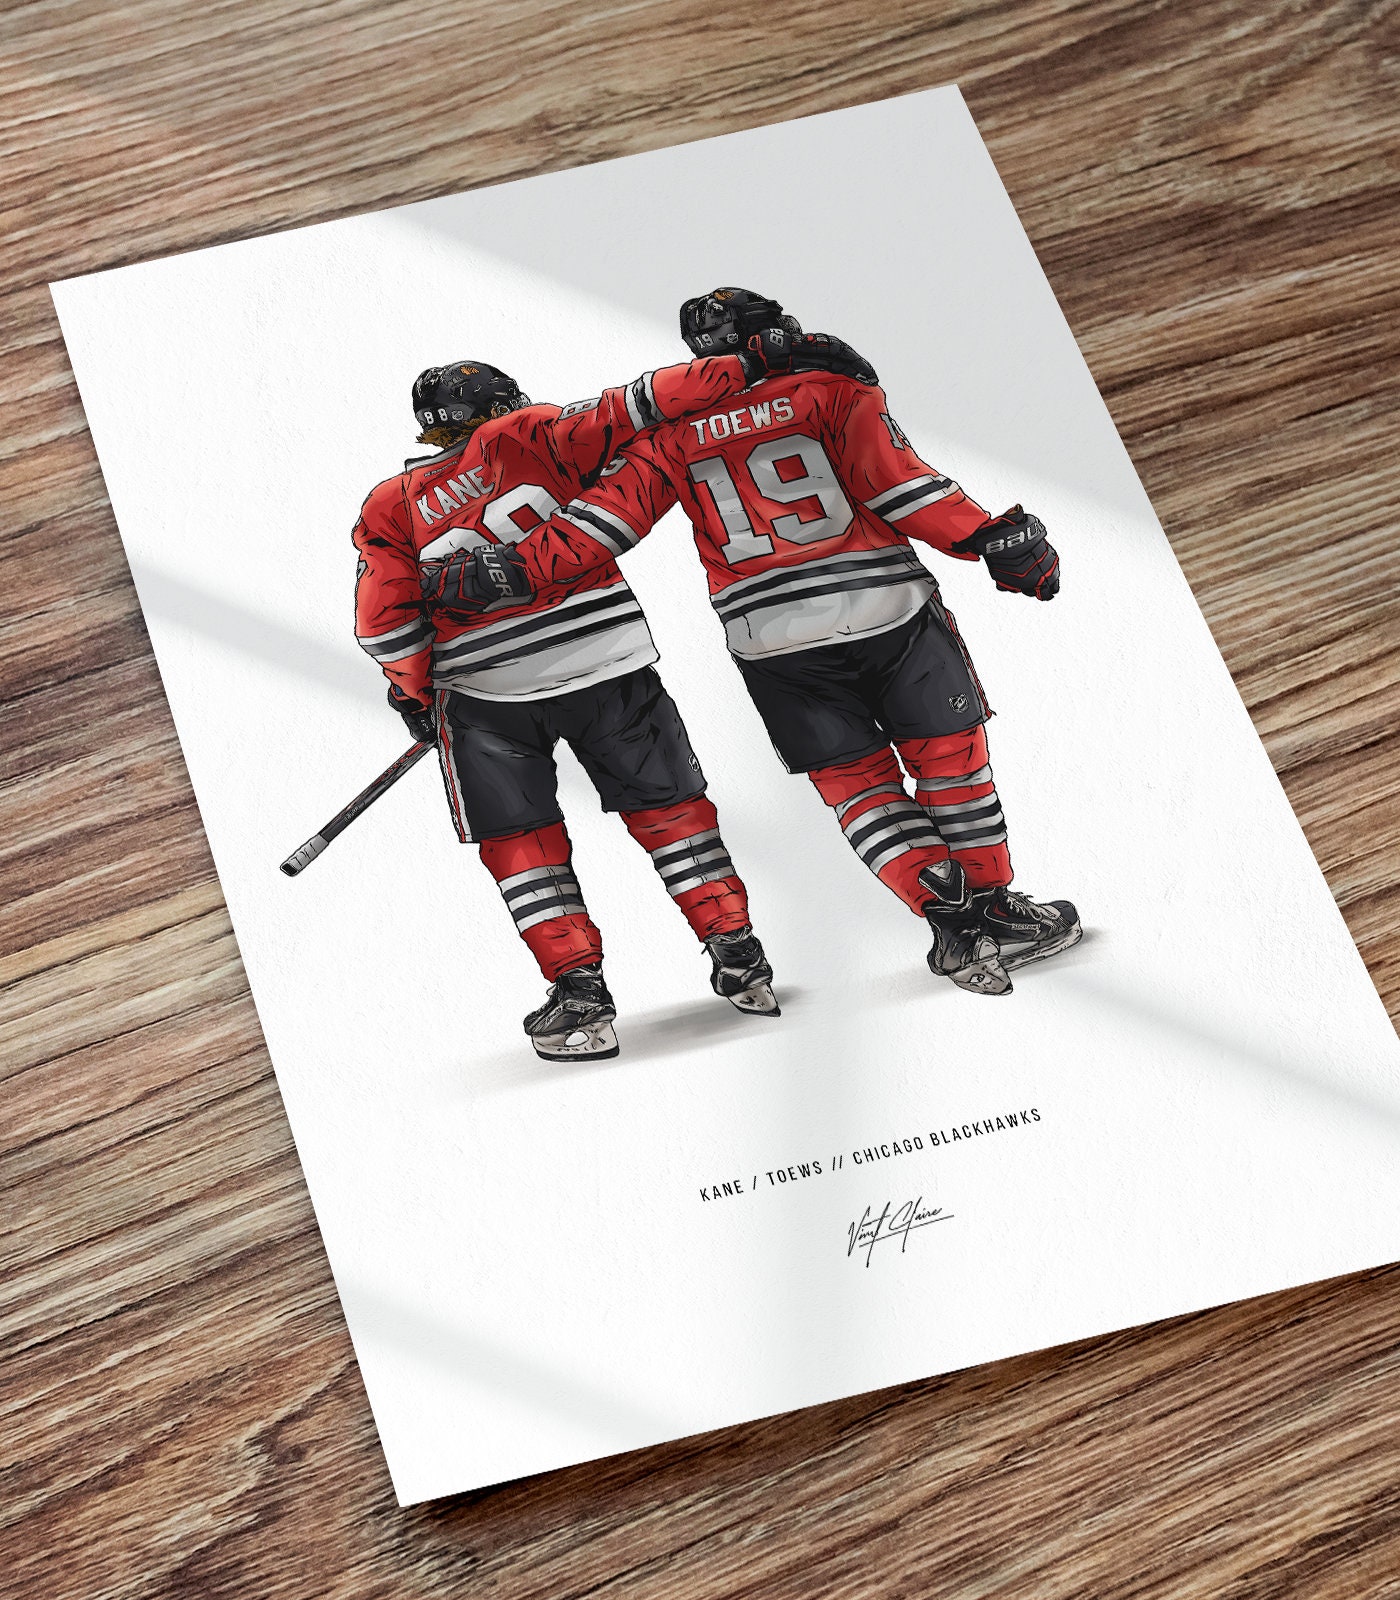 Patrick Kane Posters for Sale